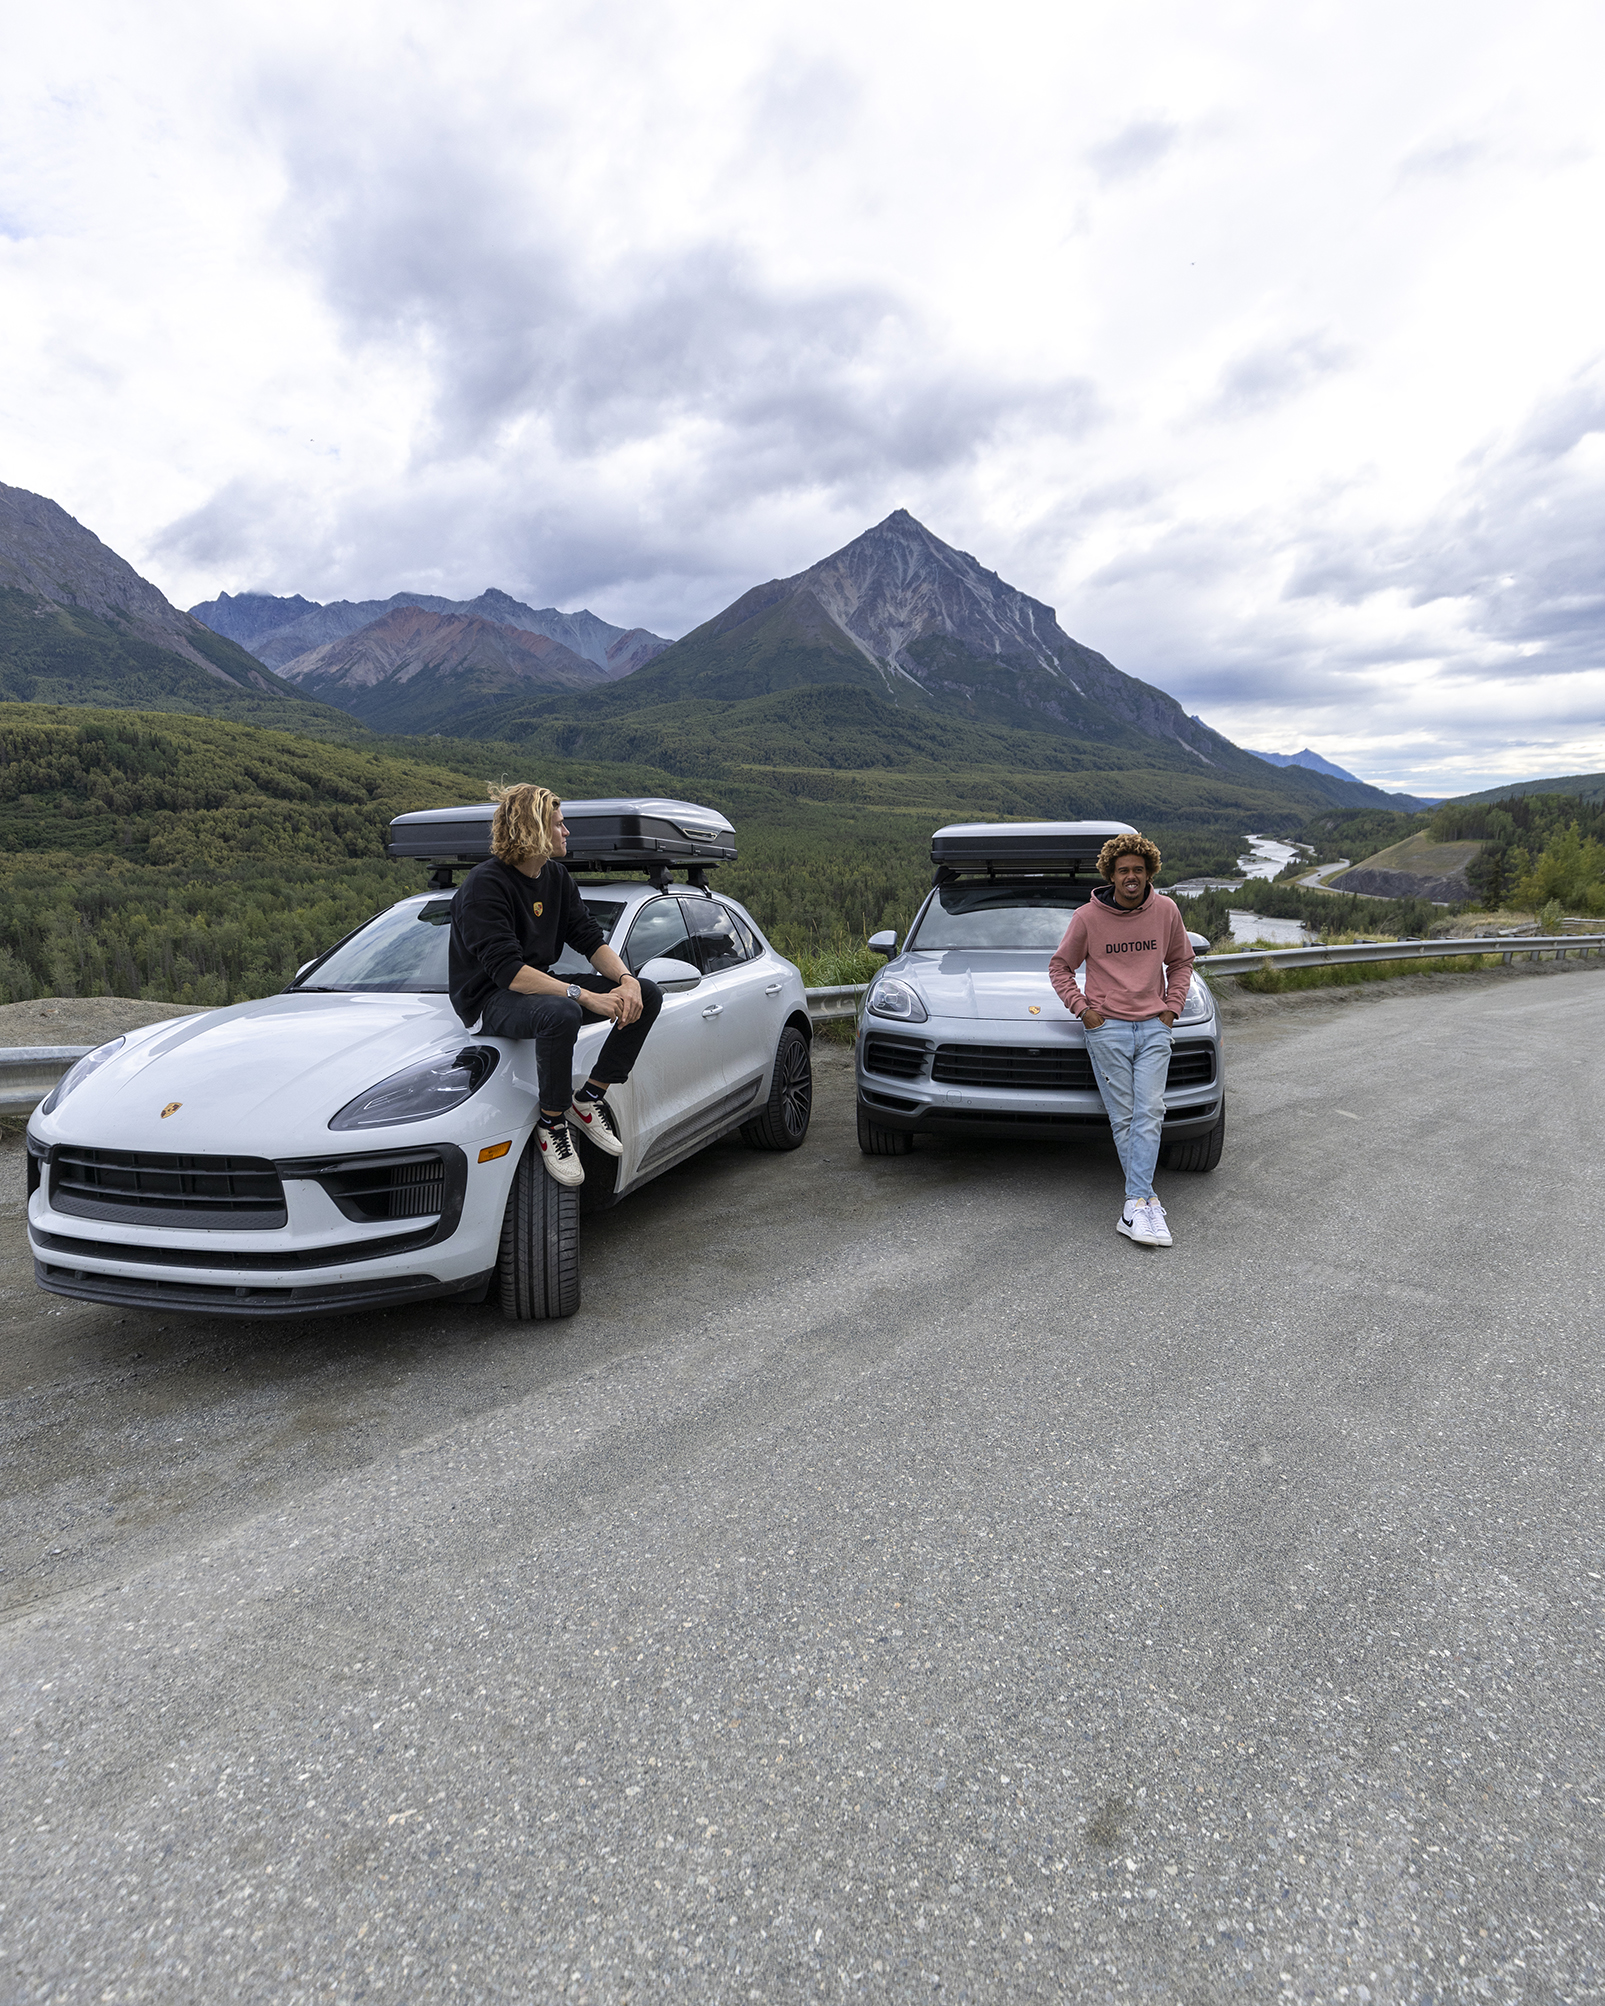 Liam Whaley, Matchu Lopes Almeida with Porsche Cayenne and Macan